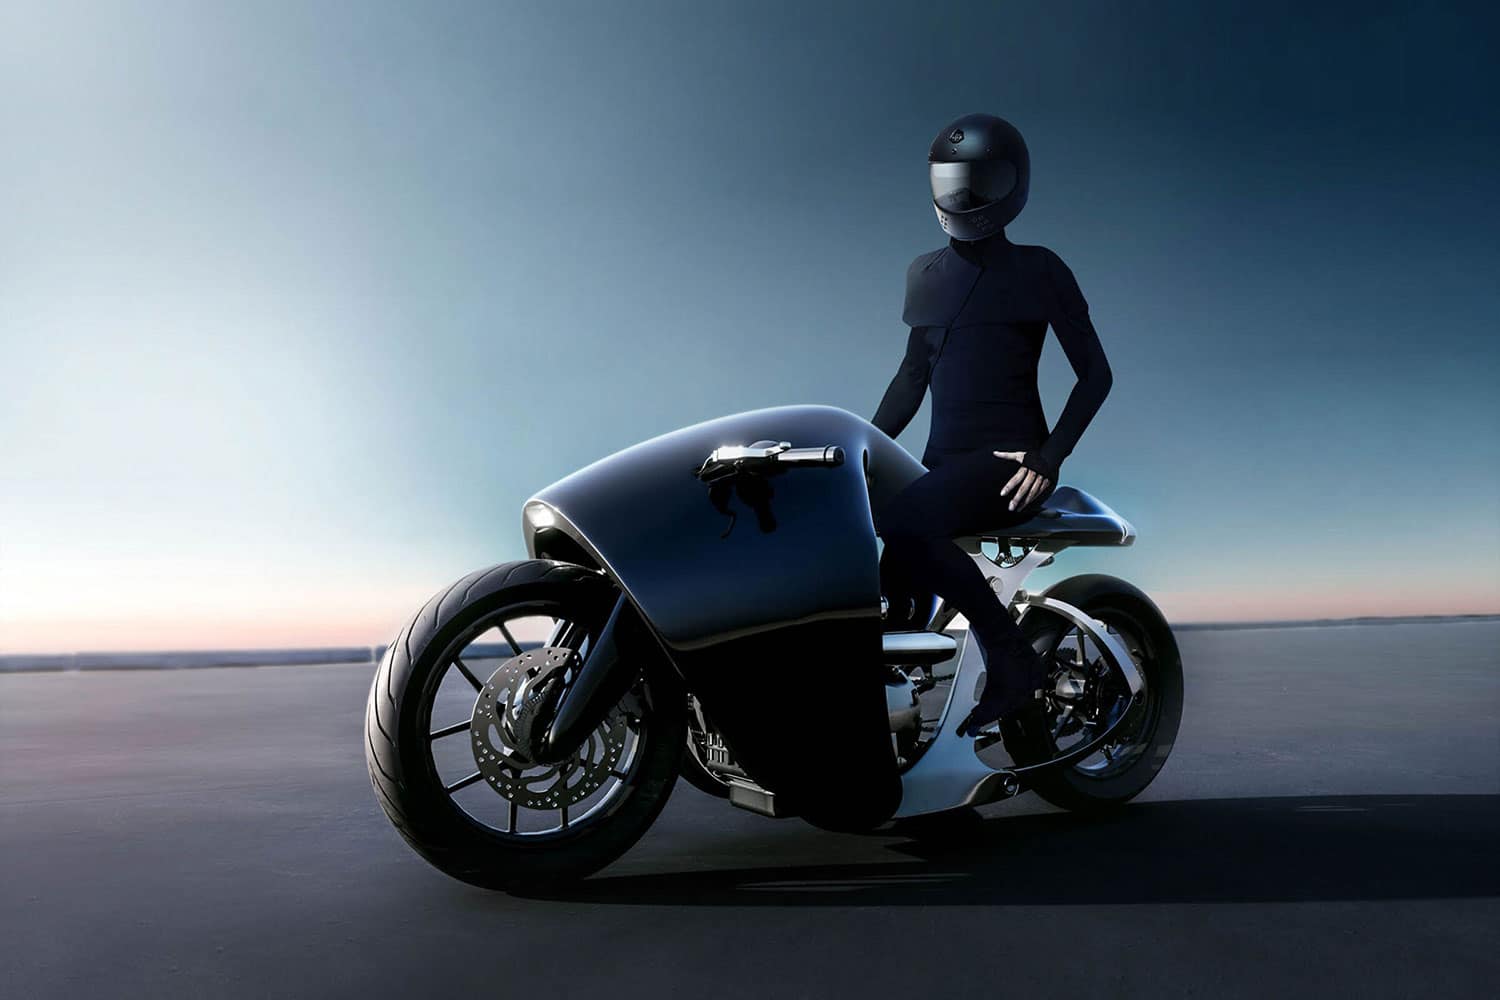 Bandit9 Supermarine motorcycle draws attention with its futuristic design.